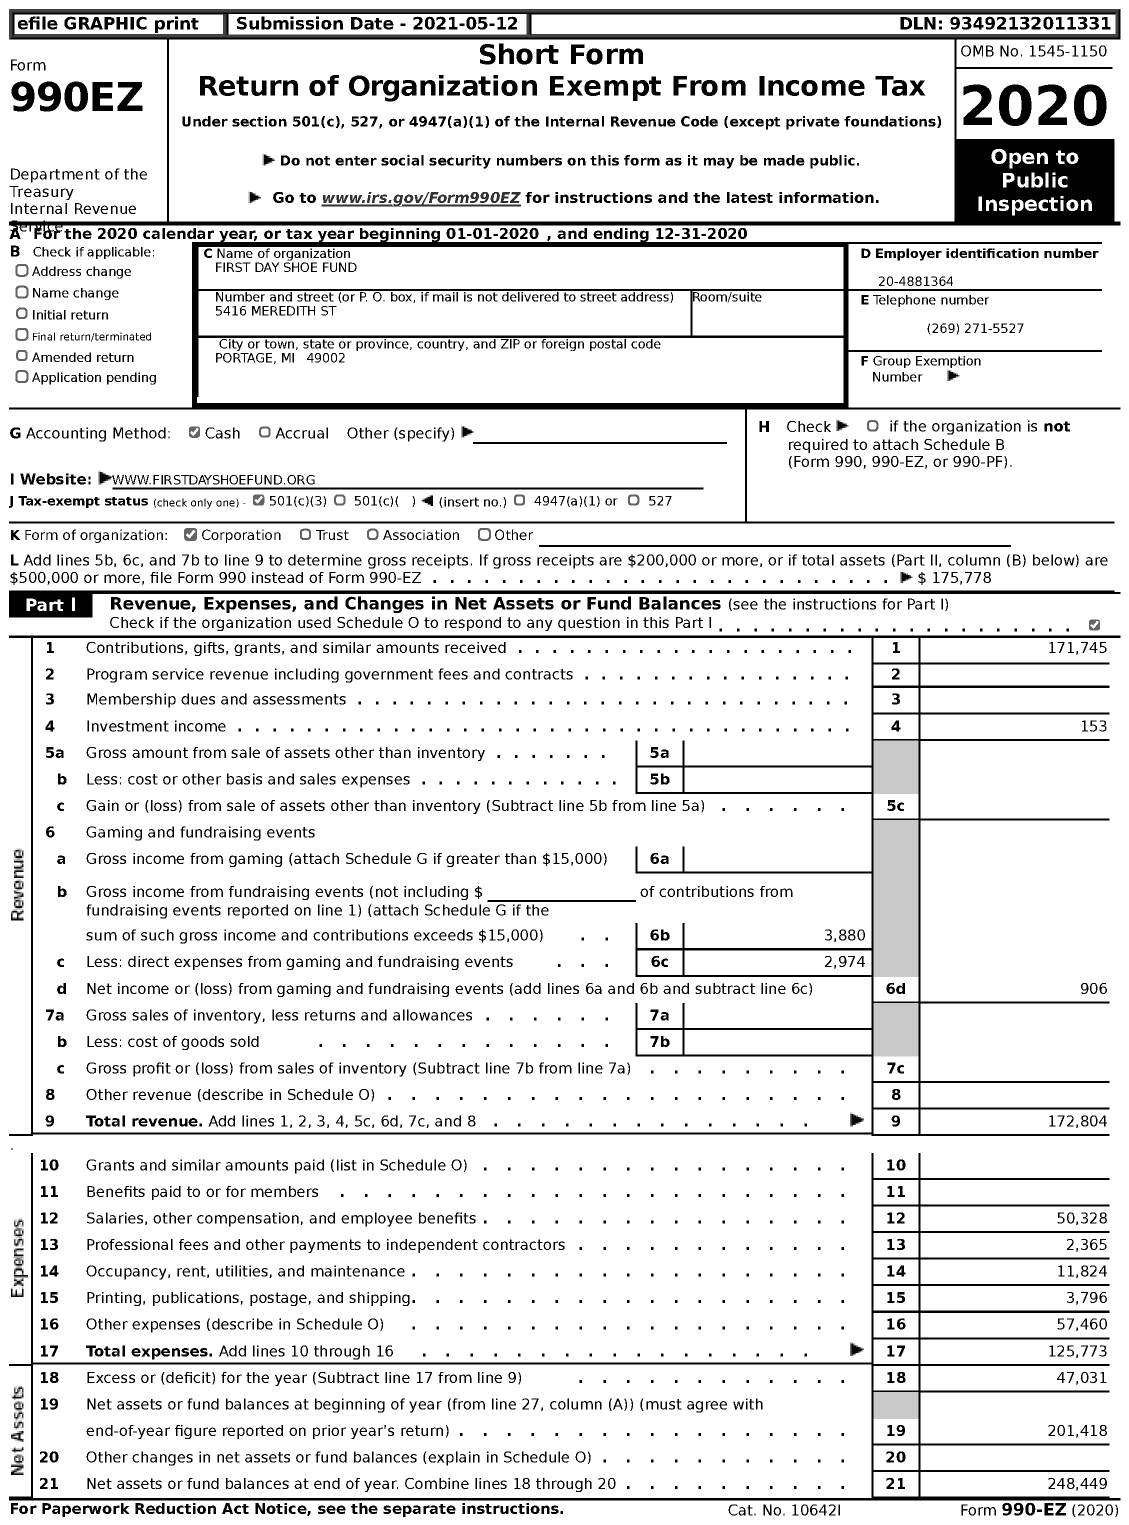 Image of first page of 2020 Form 990EZ for First Day Shoe Fund